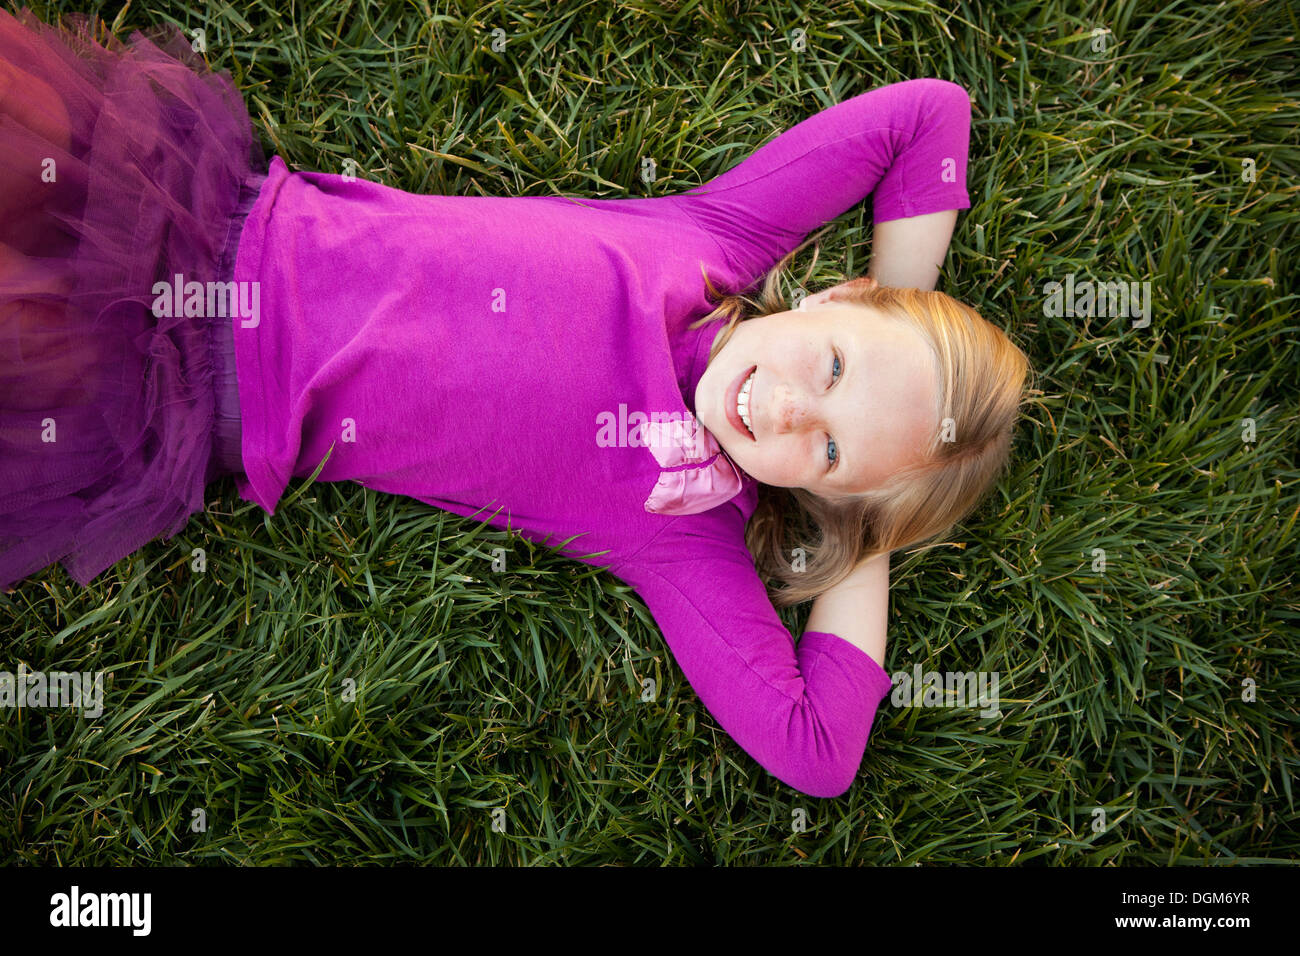 A young girl lying on her back on grass her hands behind her head smiling looking camera View from above Stock Photo